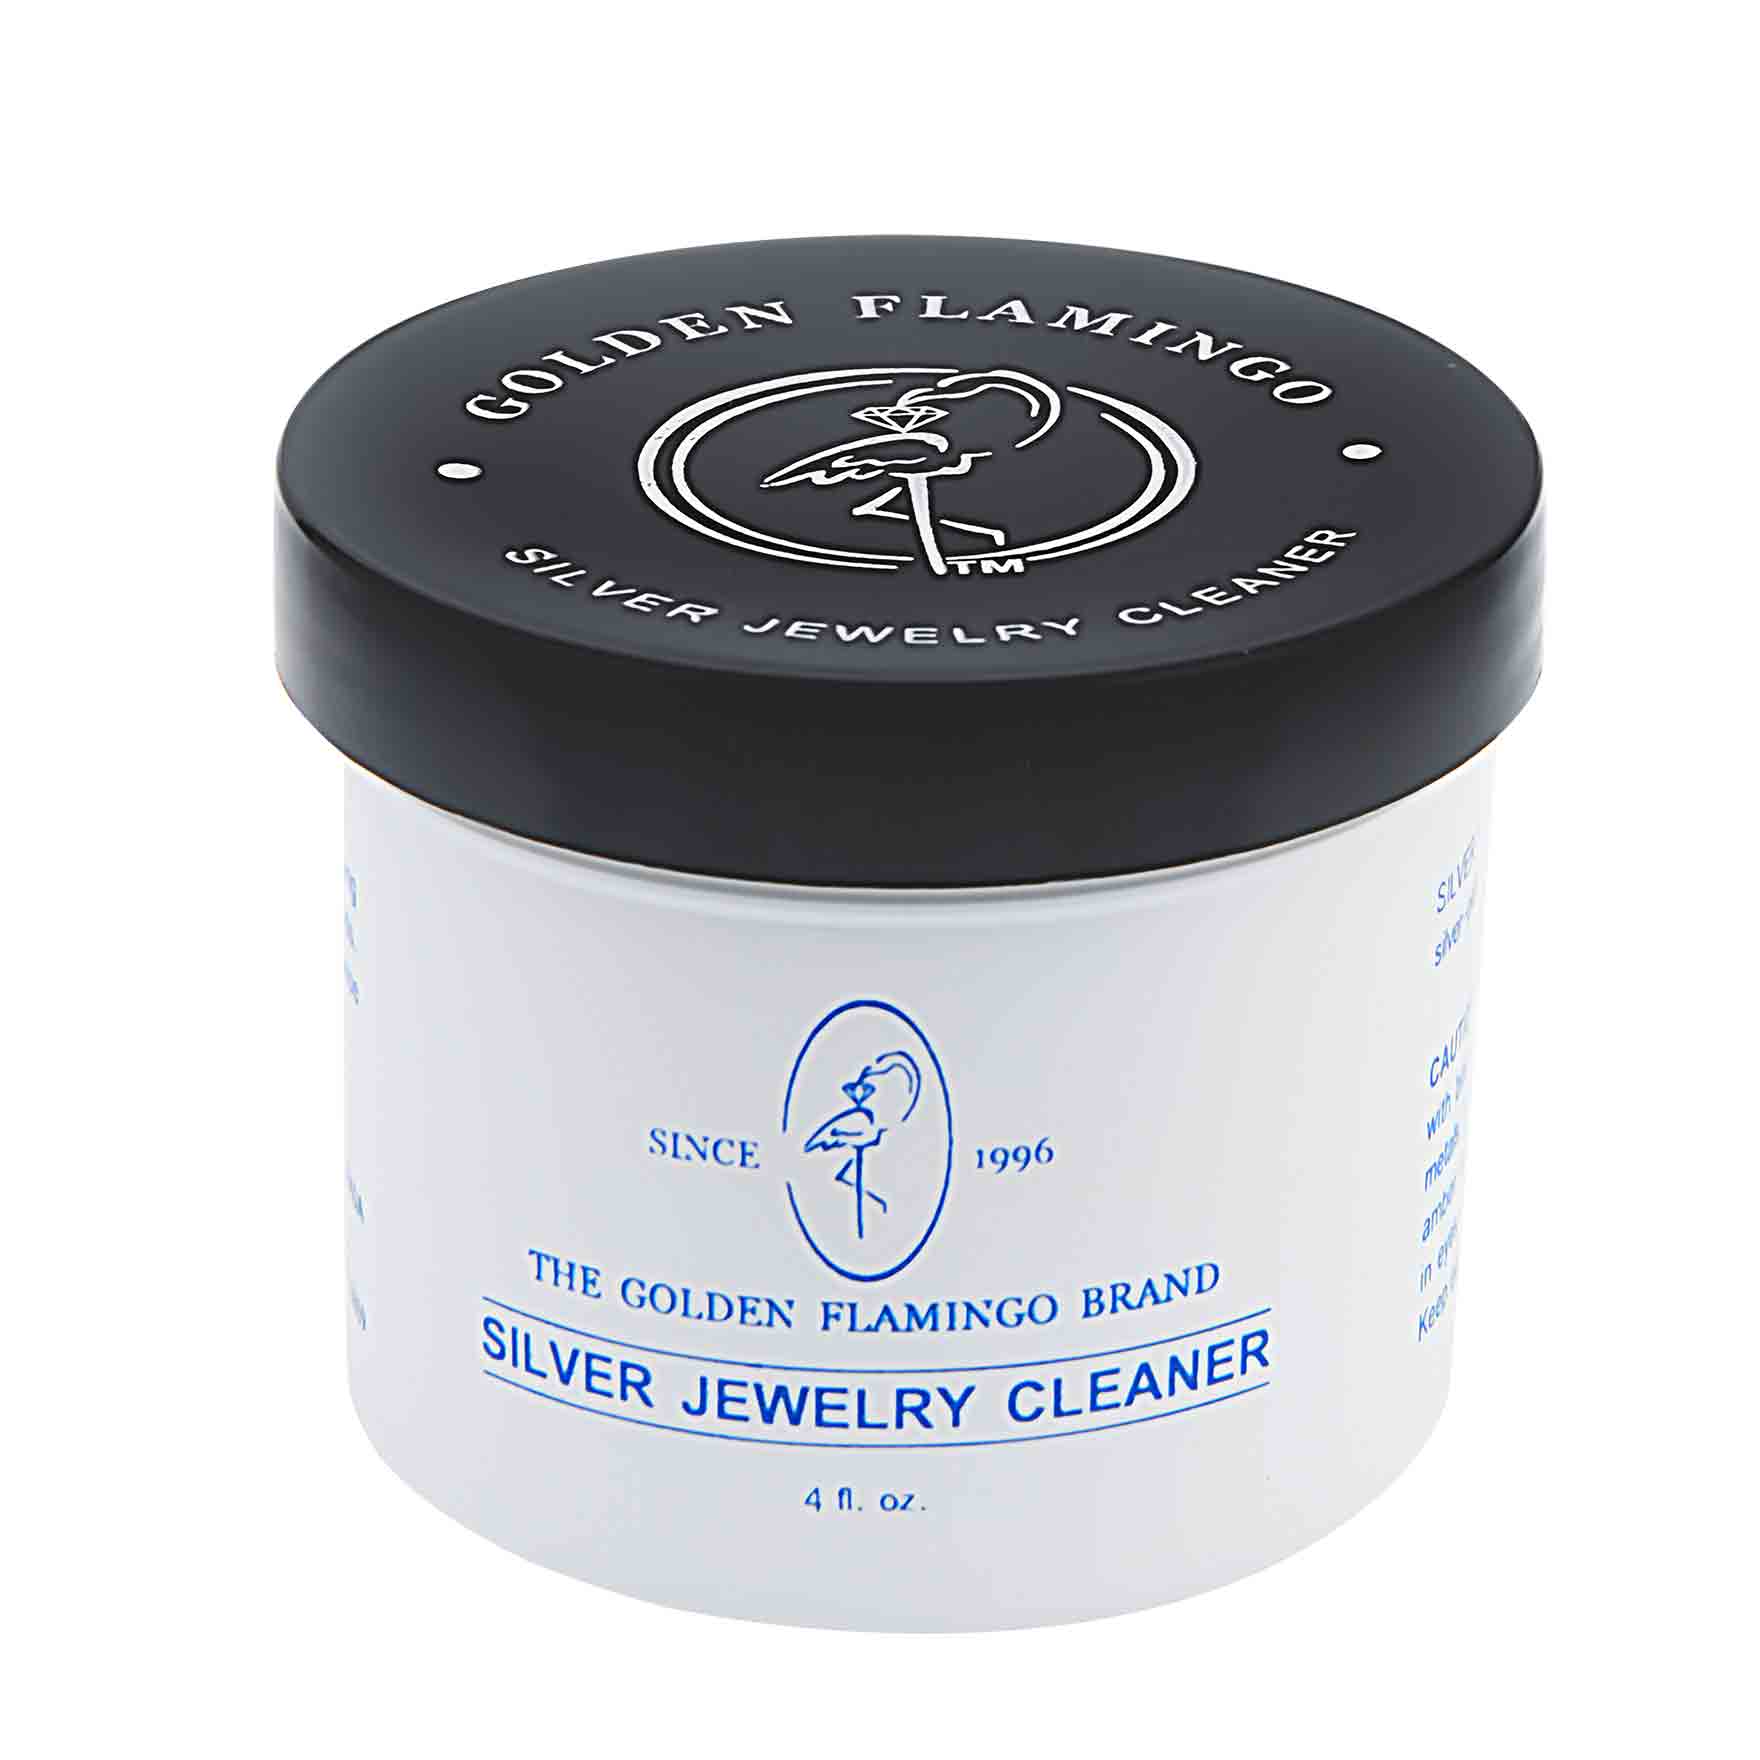 Silver jewelry cleaner